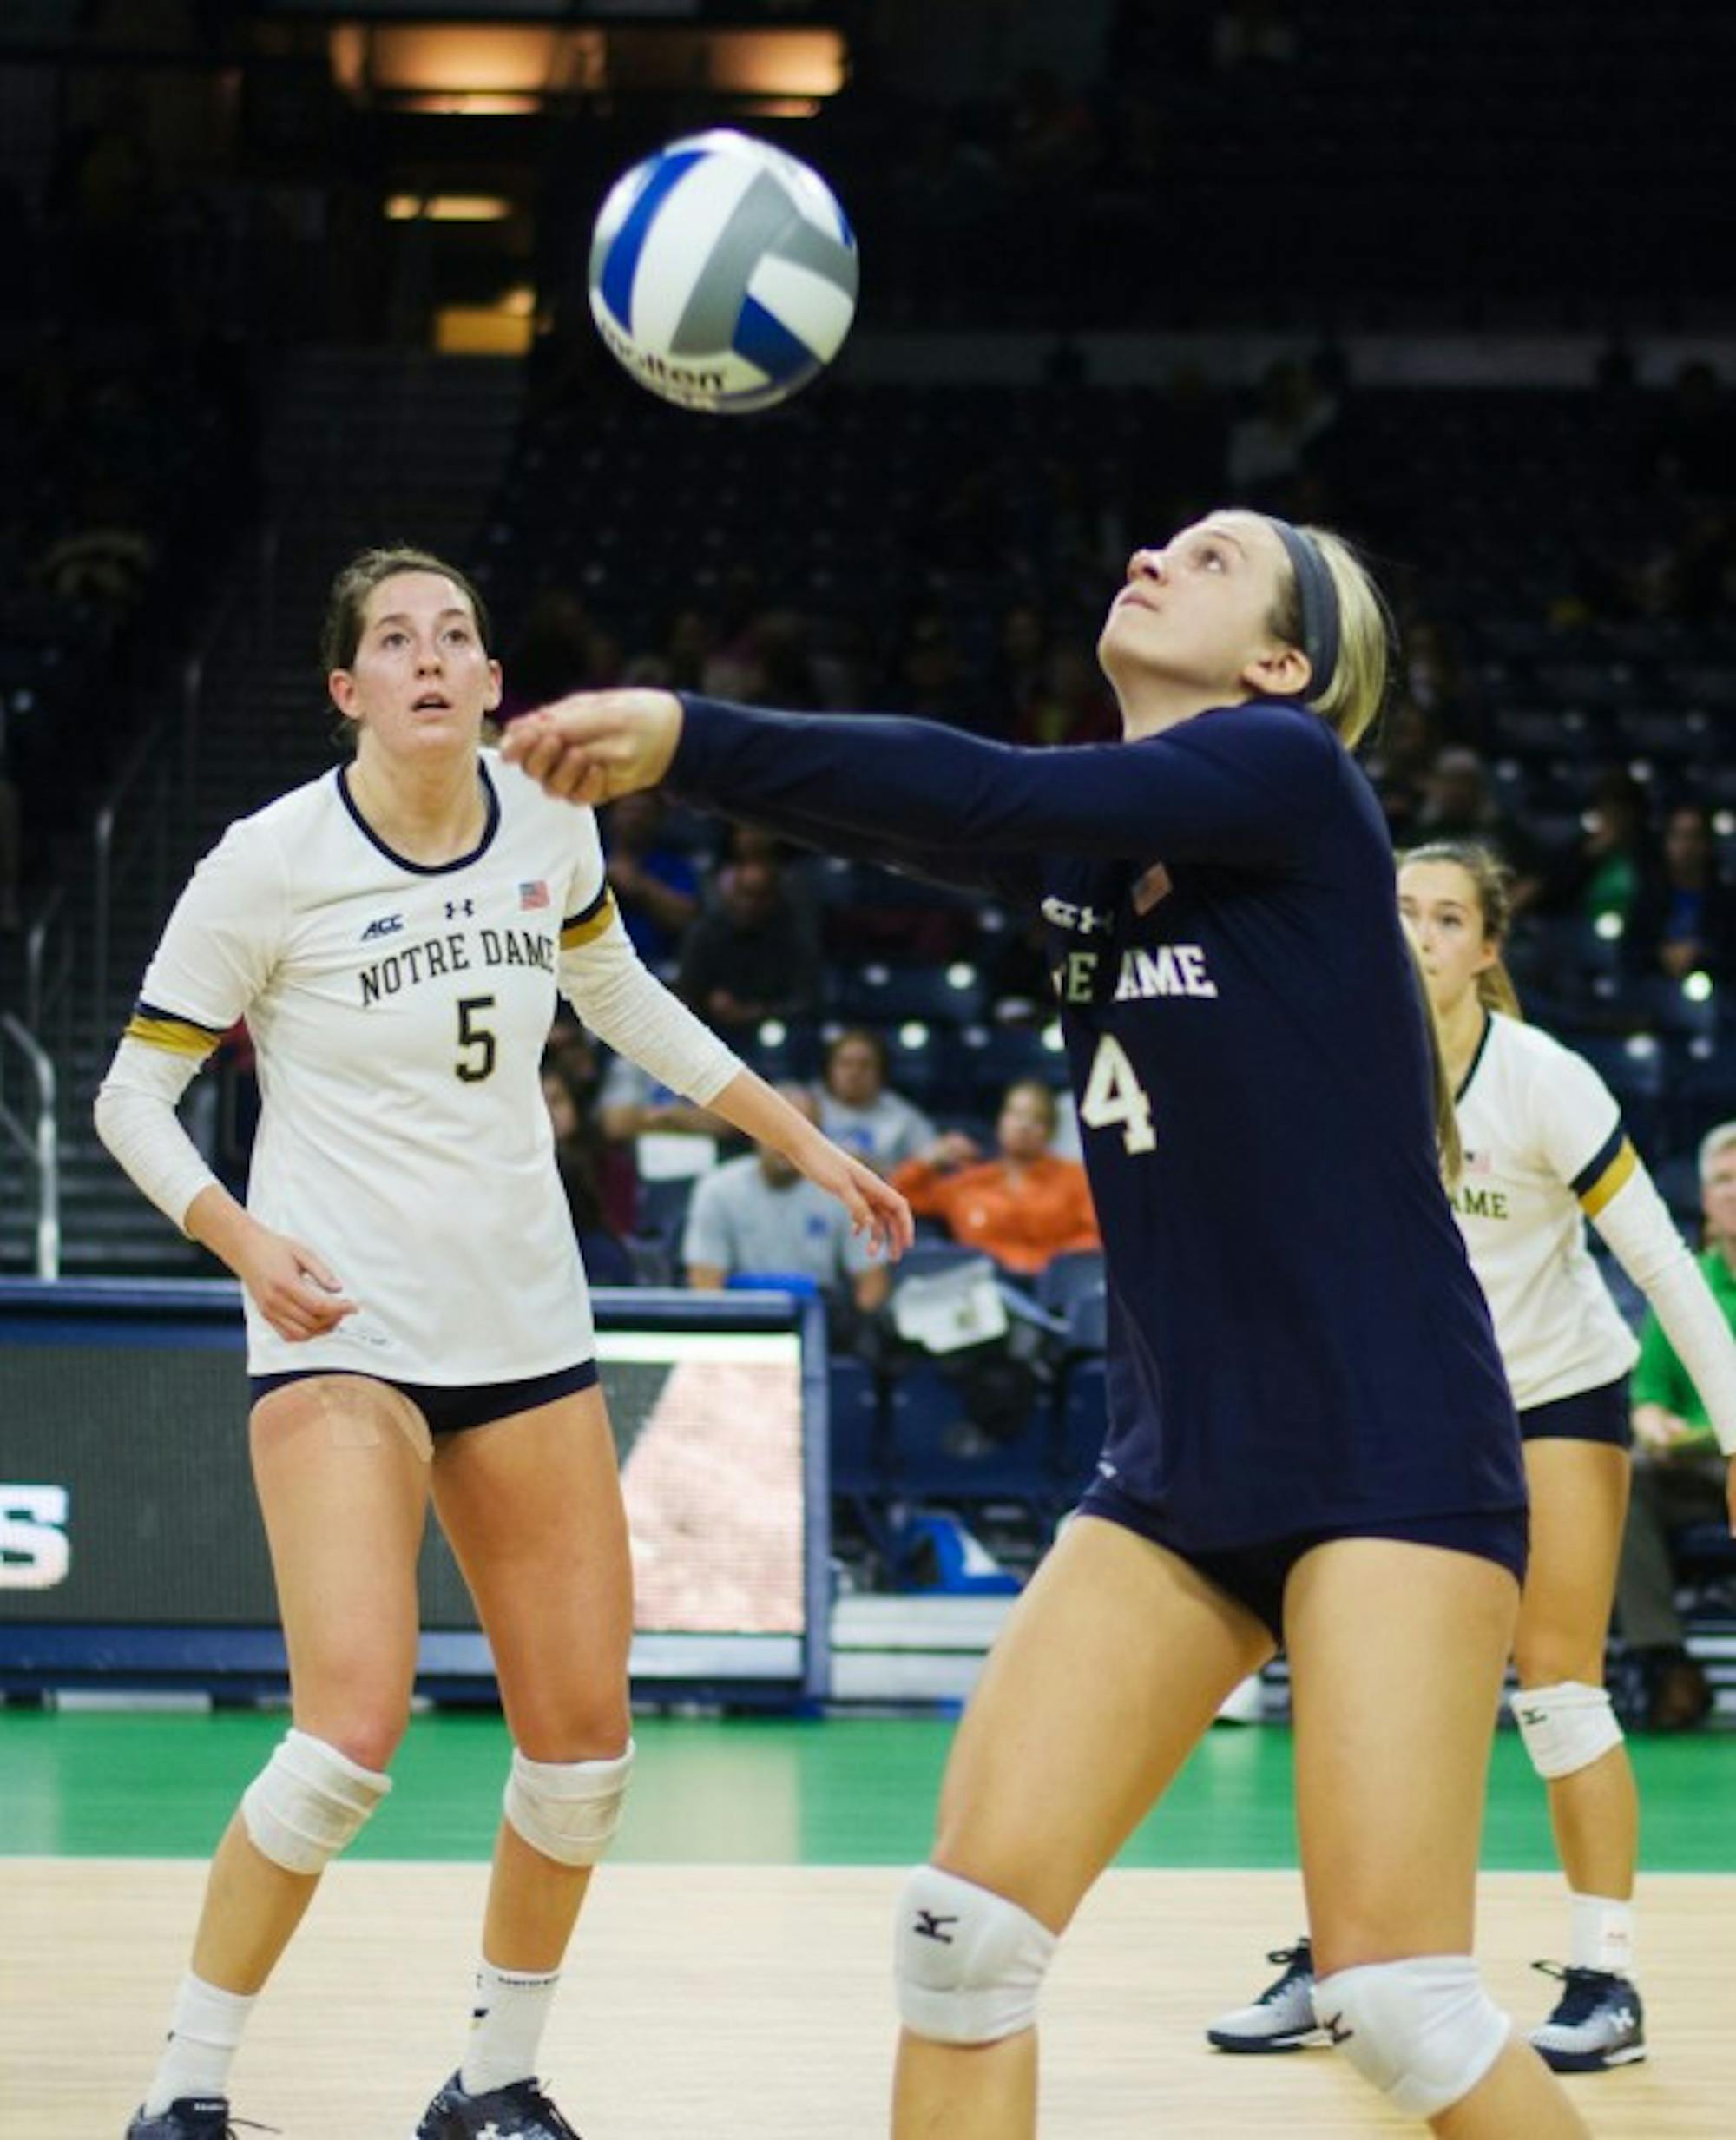 Irish sophomore libero Ryann DeJarld sets the ball during Notre Dame's 3-1 victory over Duke on Friday at Purcell Pavilion.